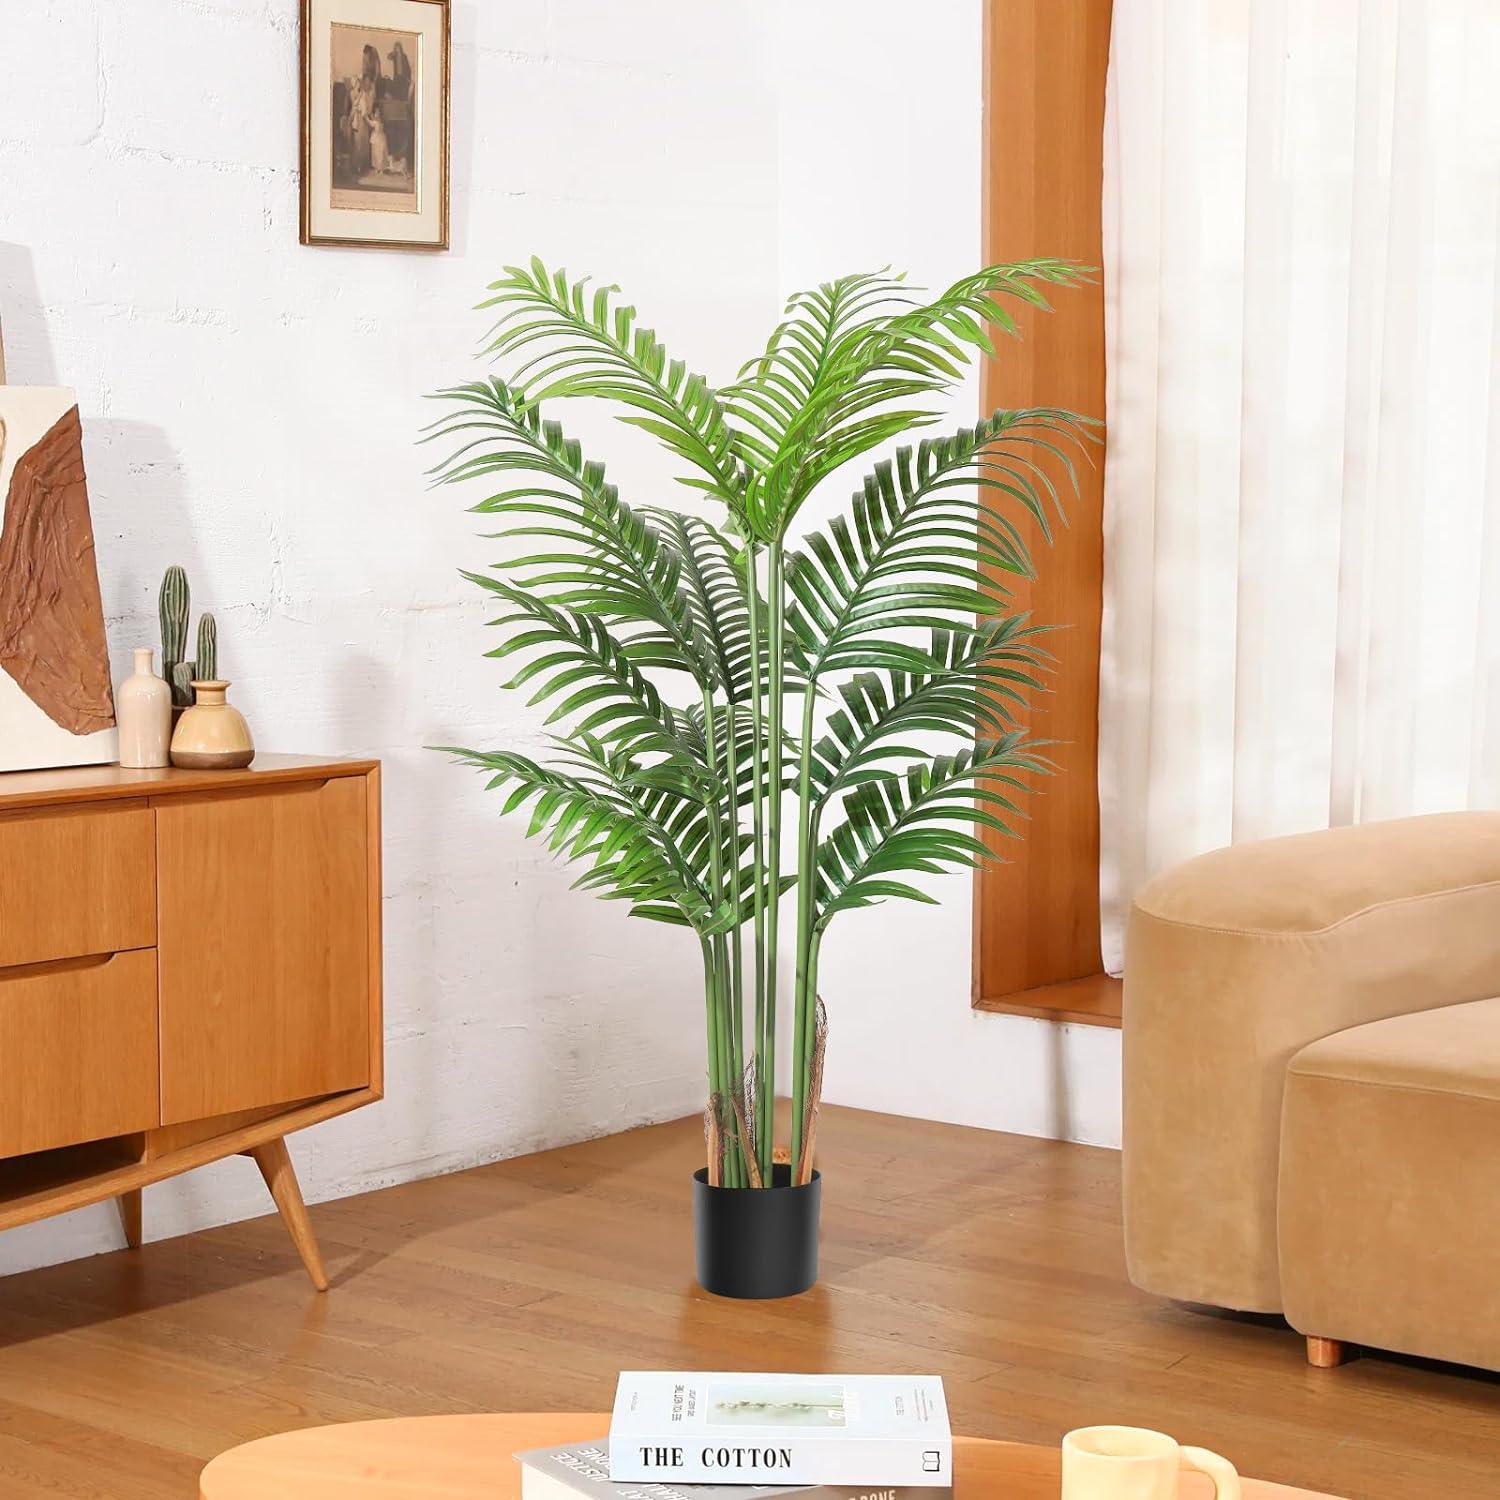 Artificial Areca Palm Plant 120CM Tall Fake Palm Tree with 12 Trunks - Massive Discounts